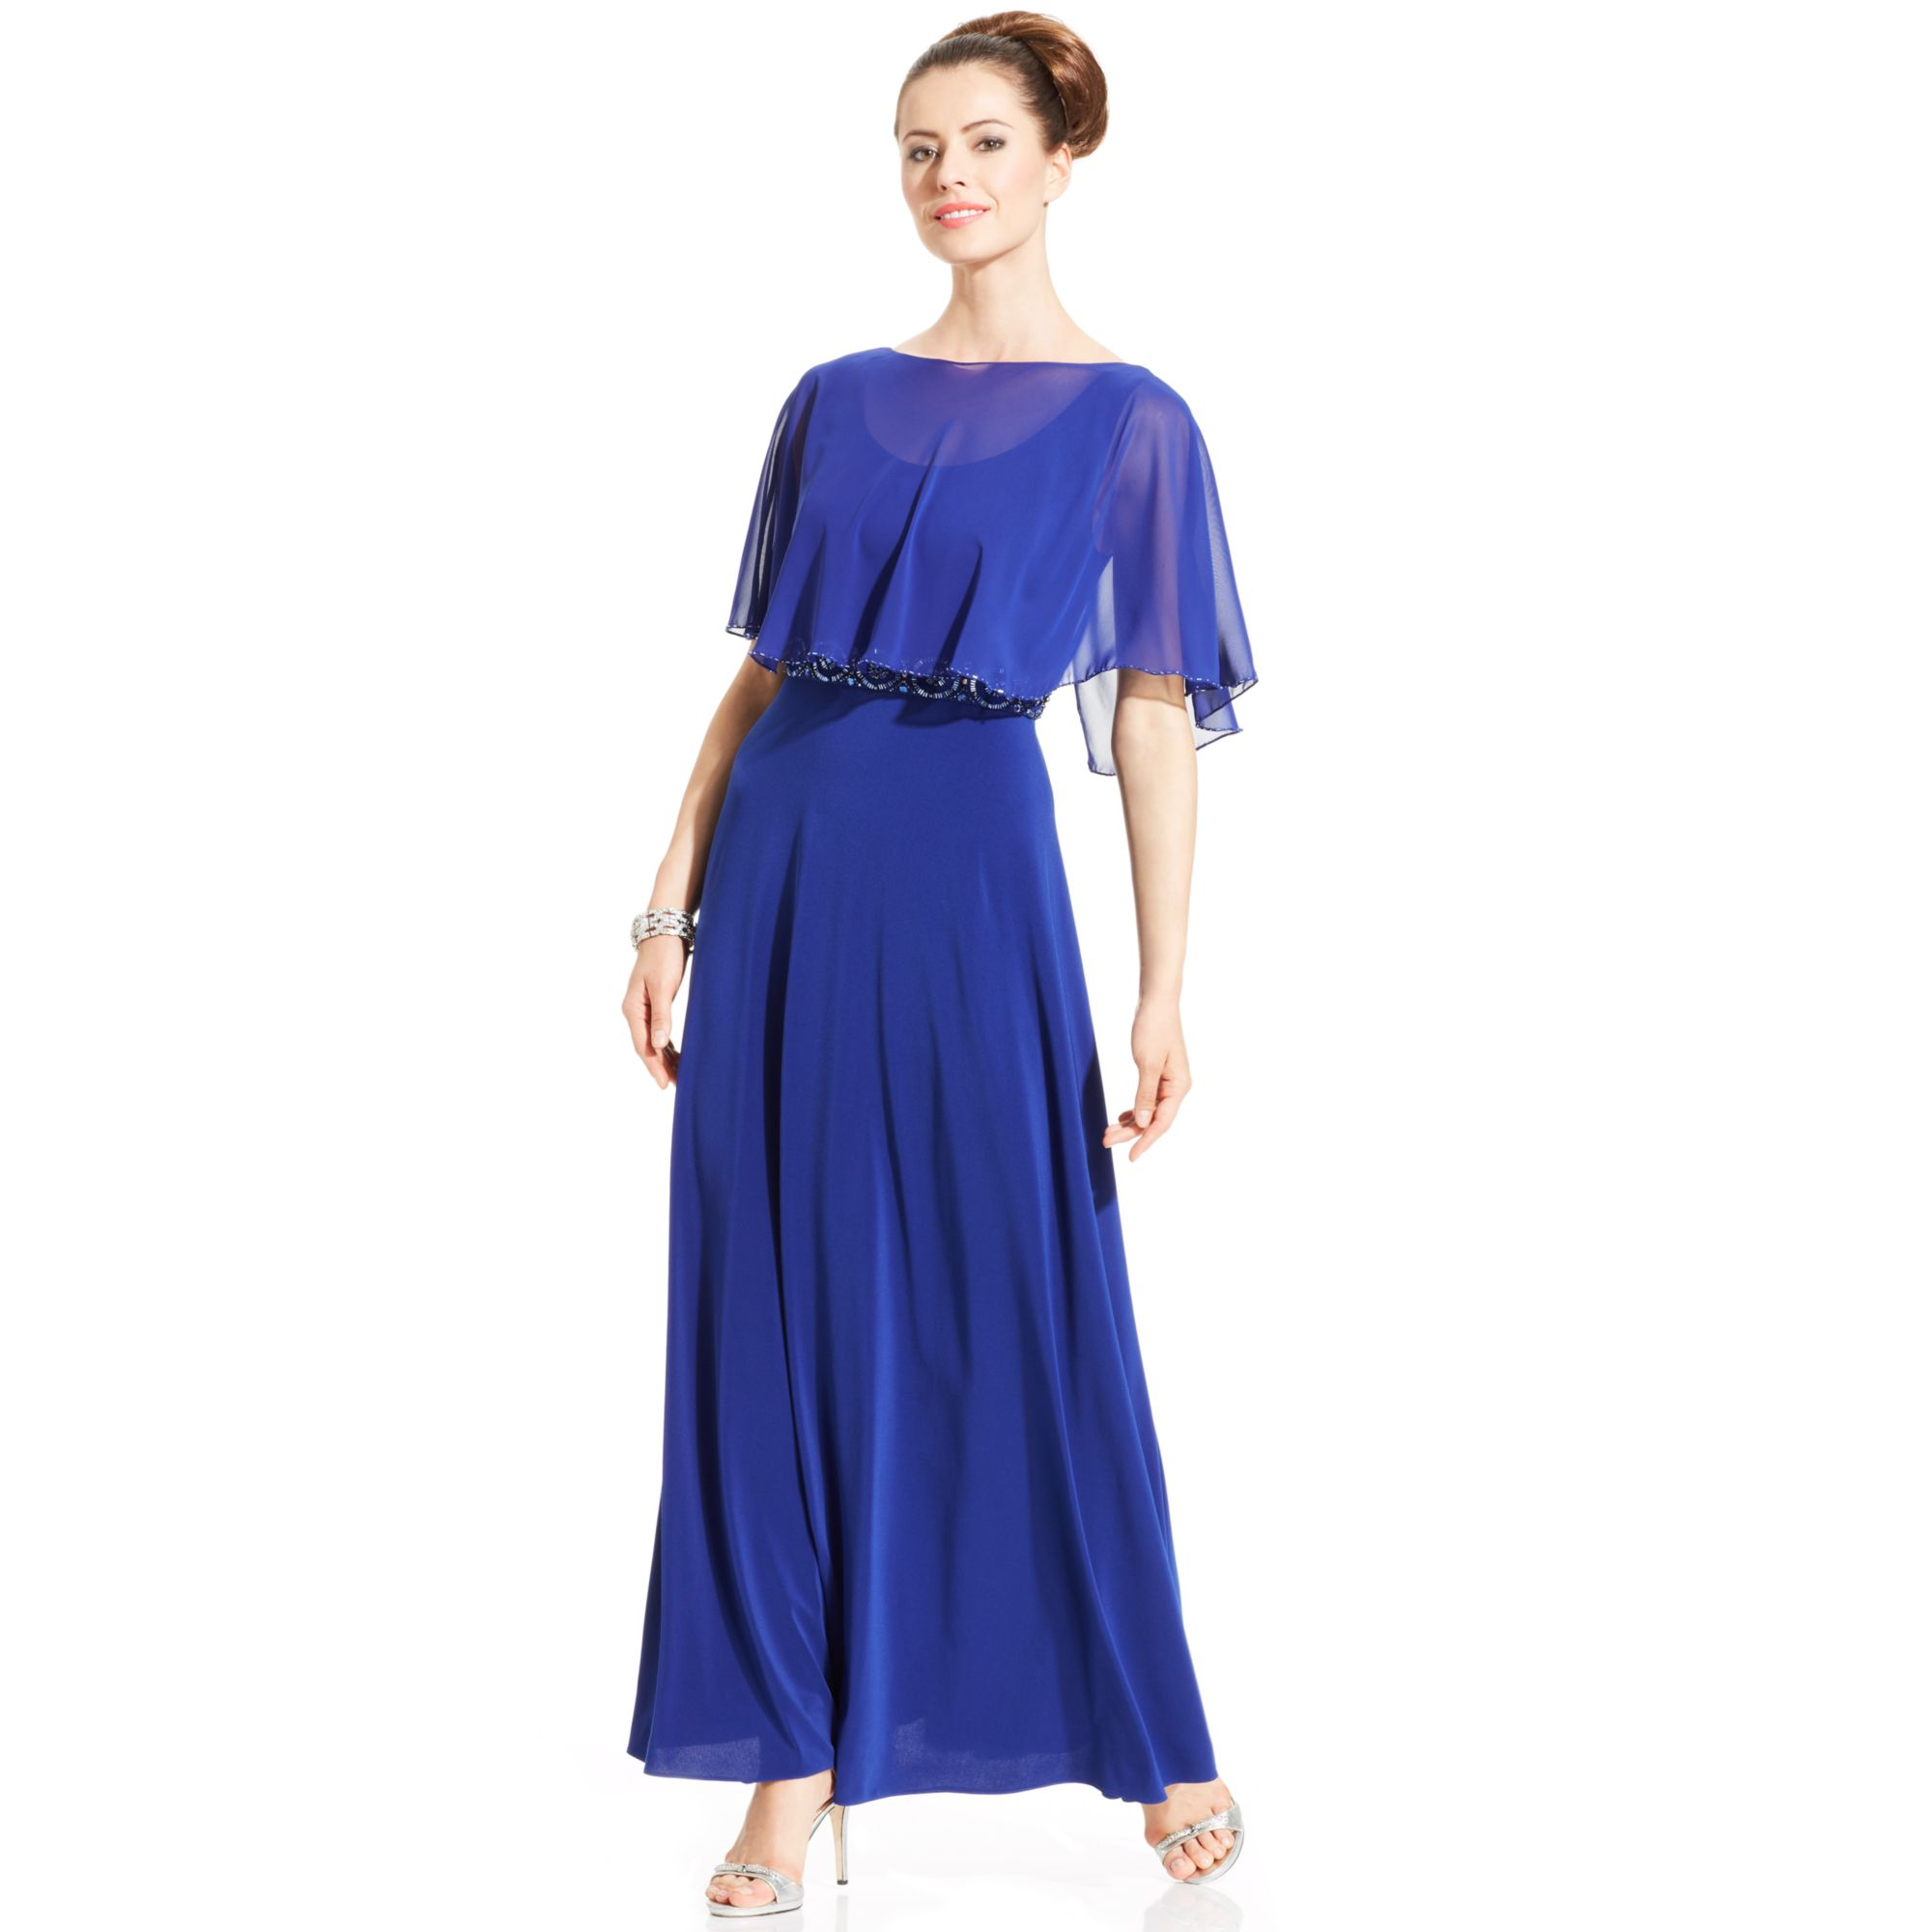 Patra Beadtrim Chiffon Capelet Gown in Blue (Royal Blue) | Lyst